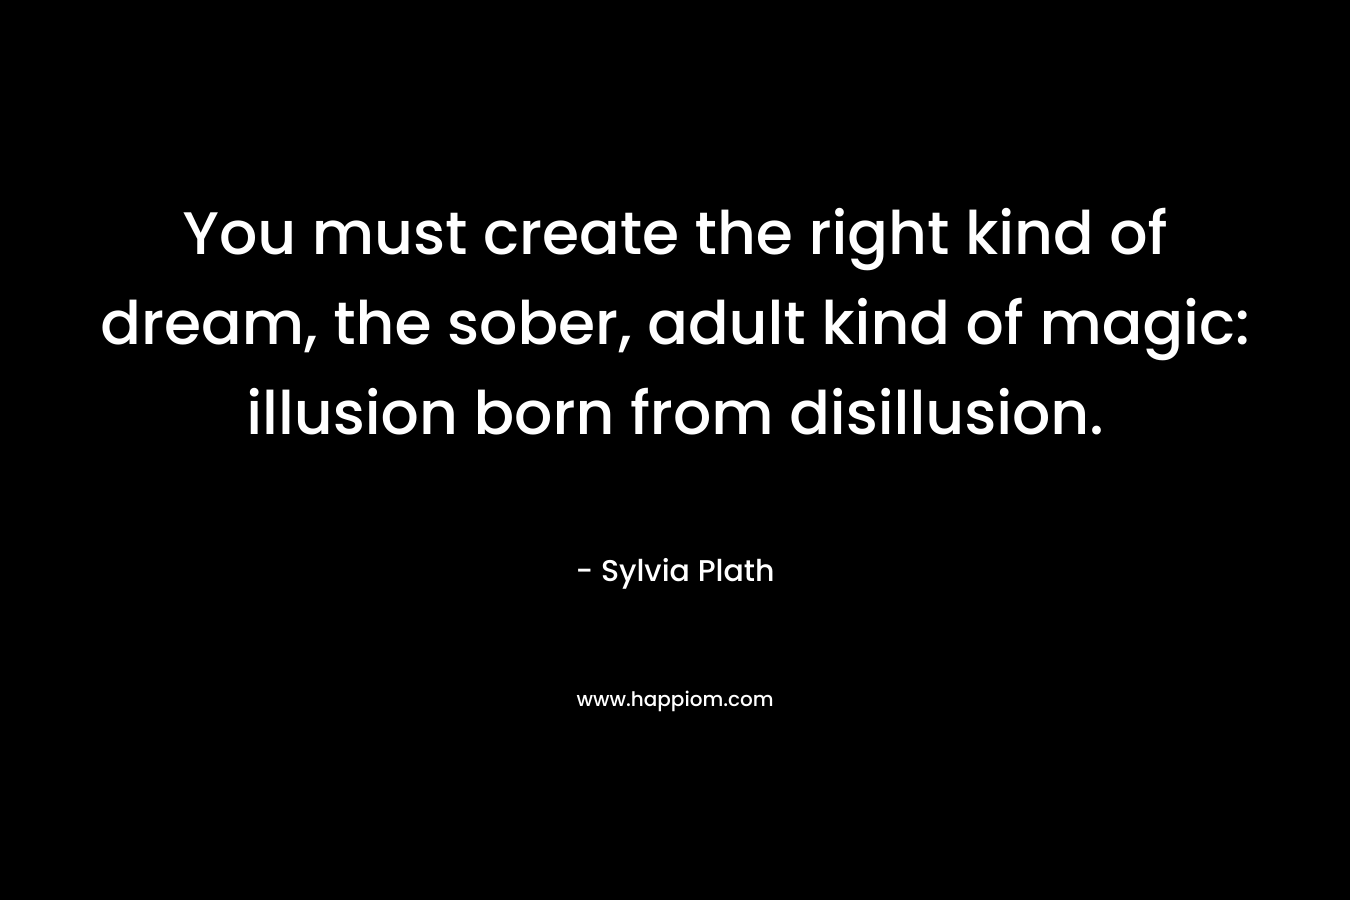 You must create the right kind of dream, the sober, adult kind of magic: illusion born from disillusion. – Sylvia Plath